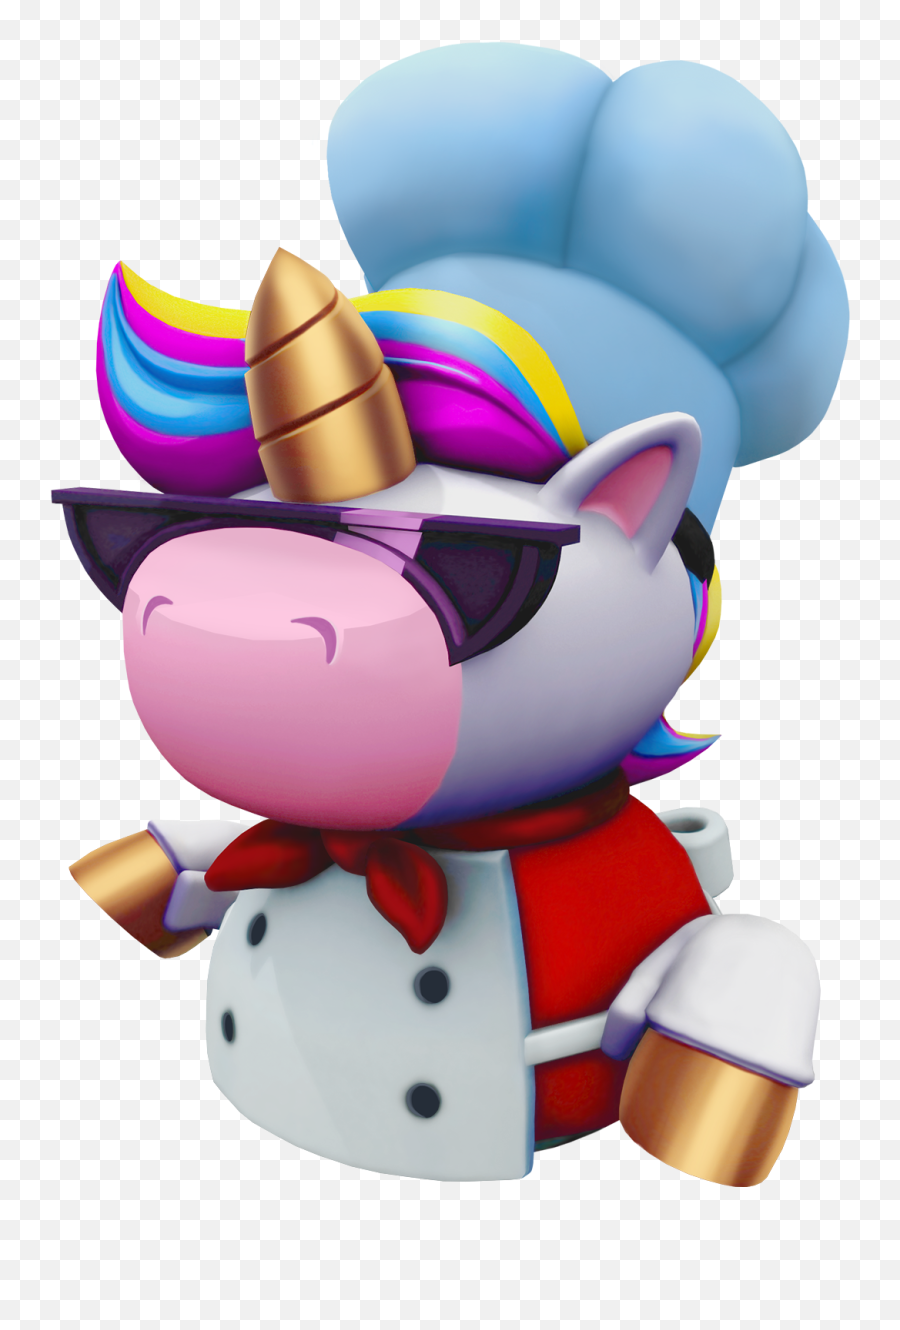 If You Are Too Hot Invite More People - Overcooked 2 Personajes Png Emoji,Unicorn Emoji Shoulder Off